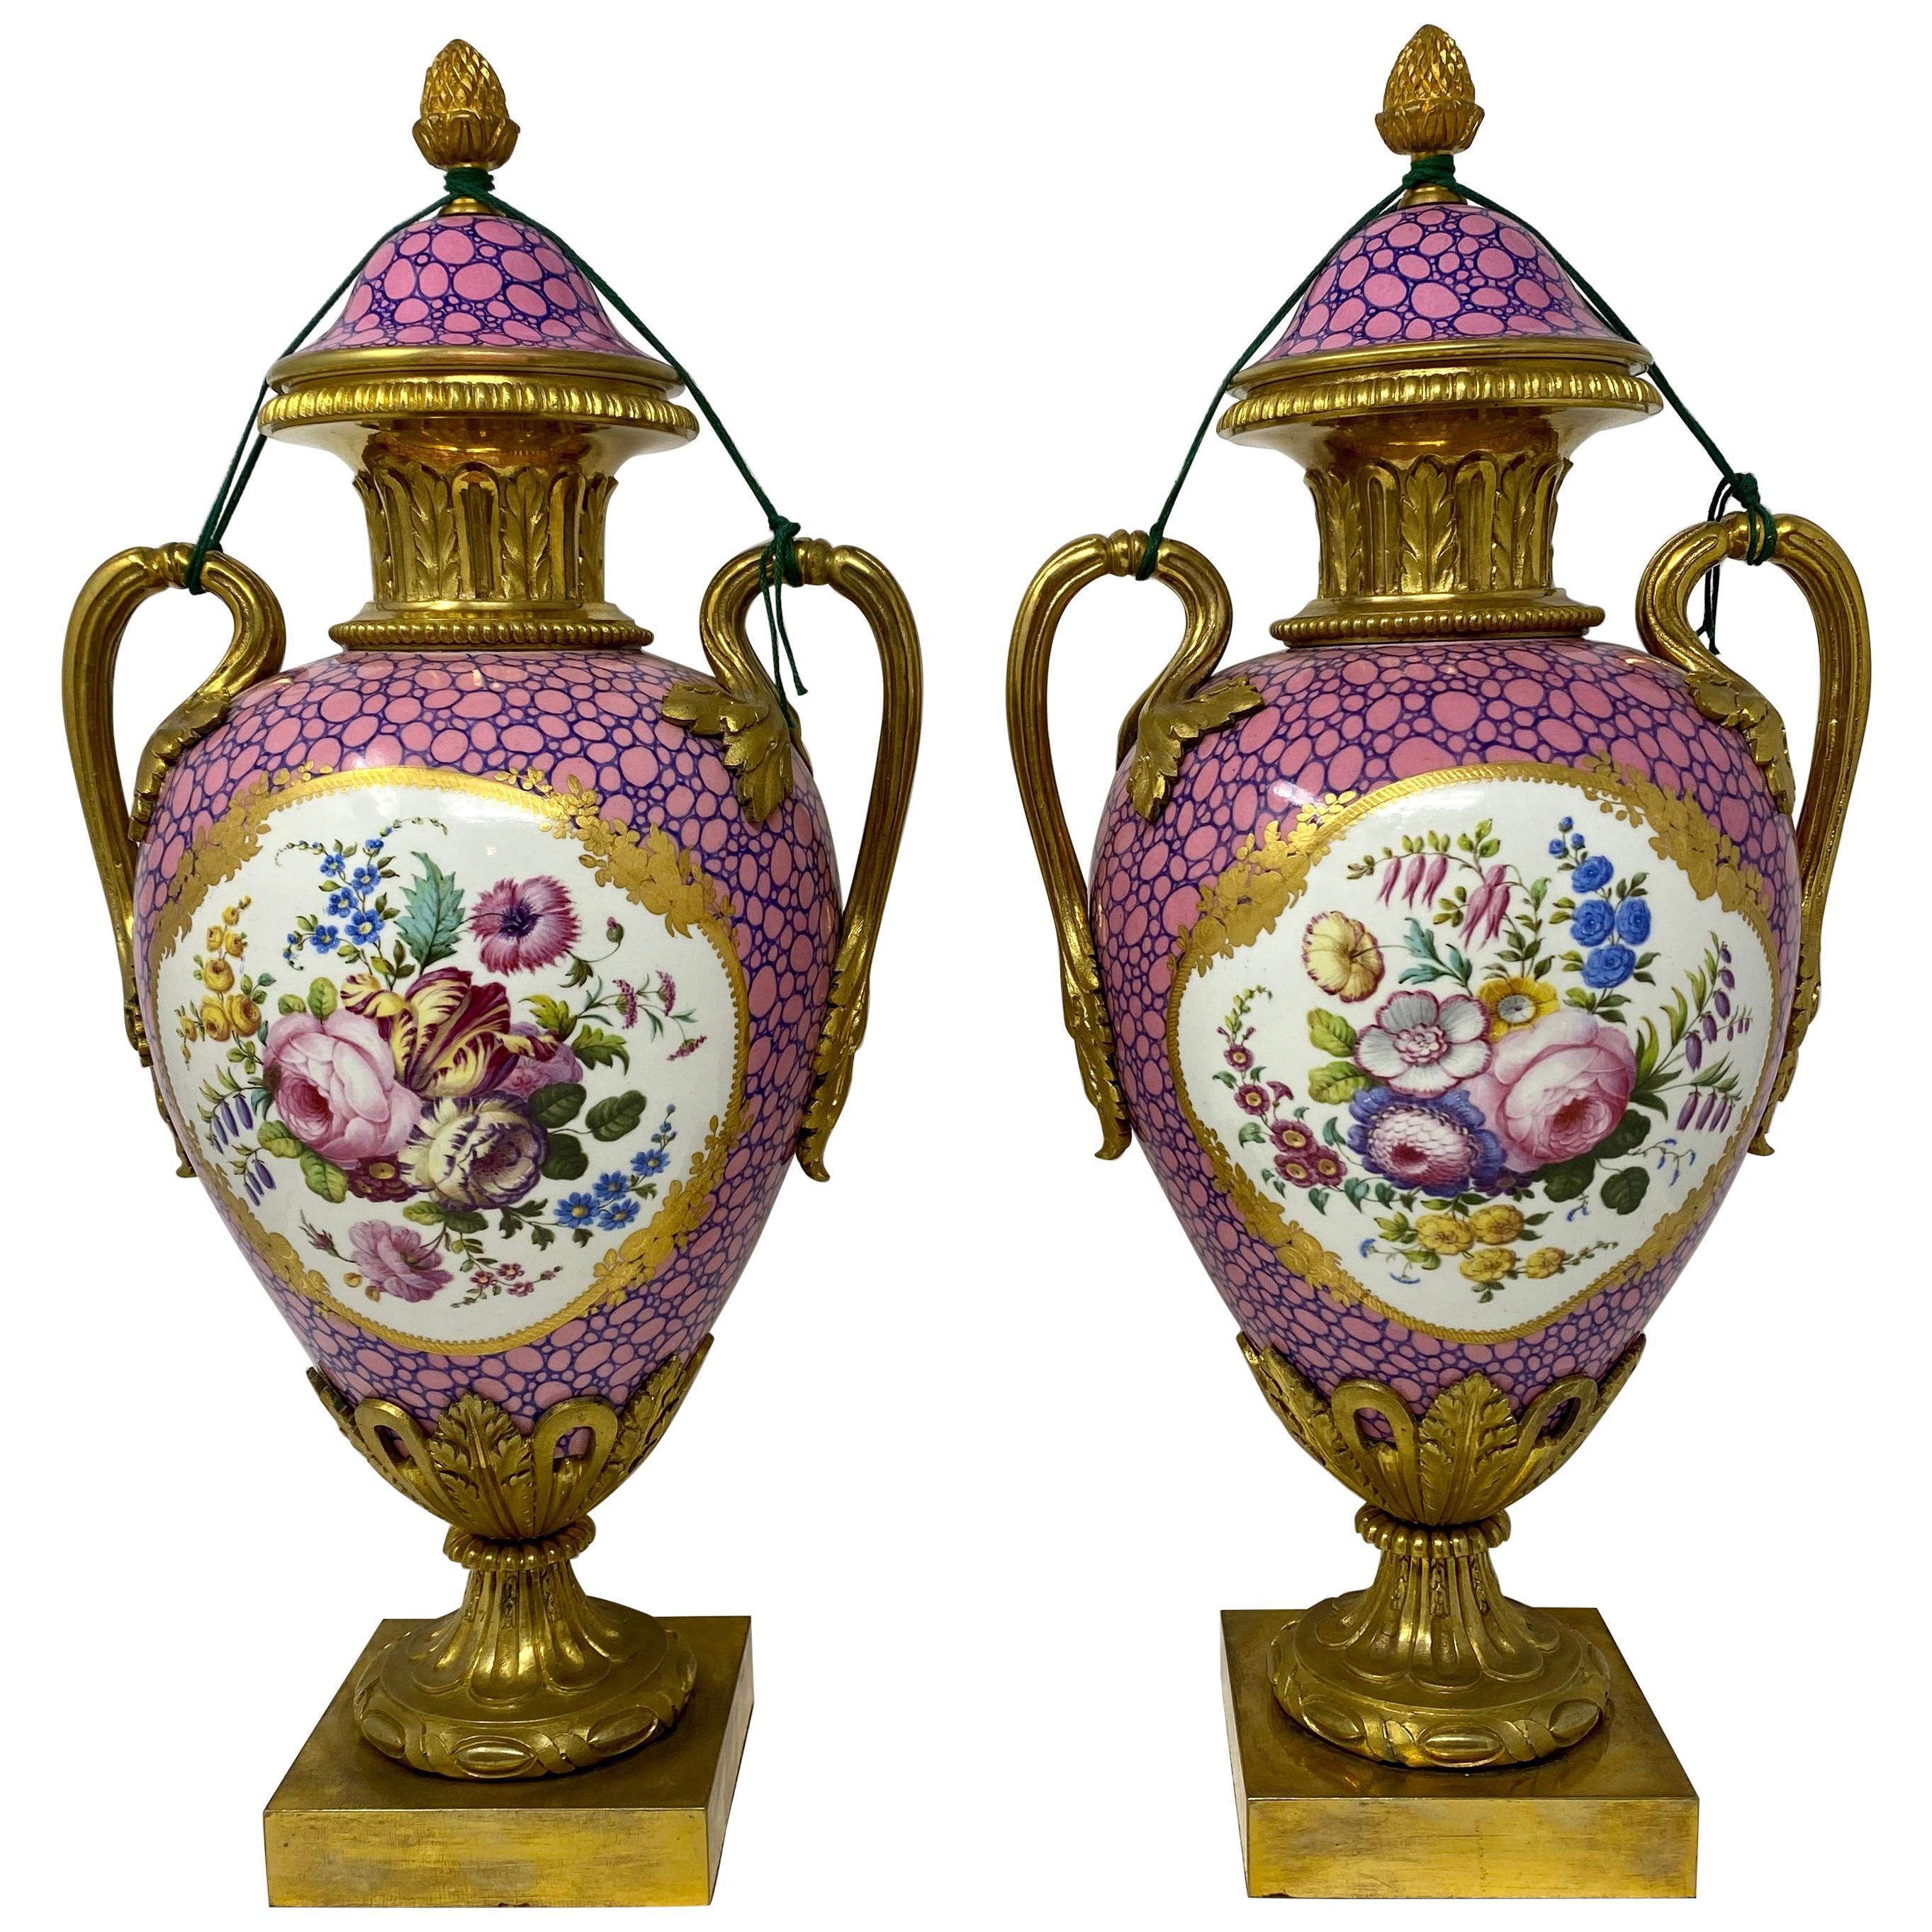 Pair of Antique Mid-19th Century French Sèvres "Rare Dubarry Rose" Urns For Sale